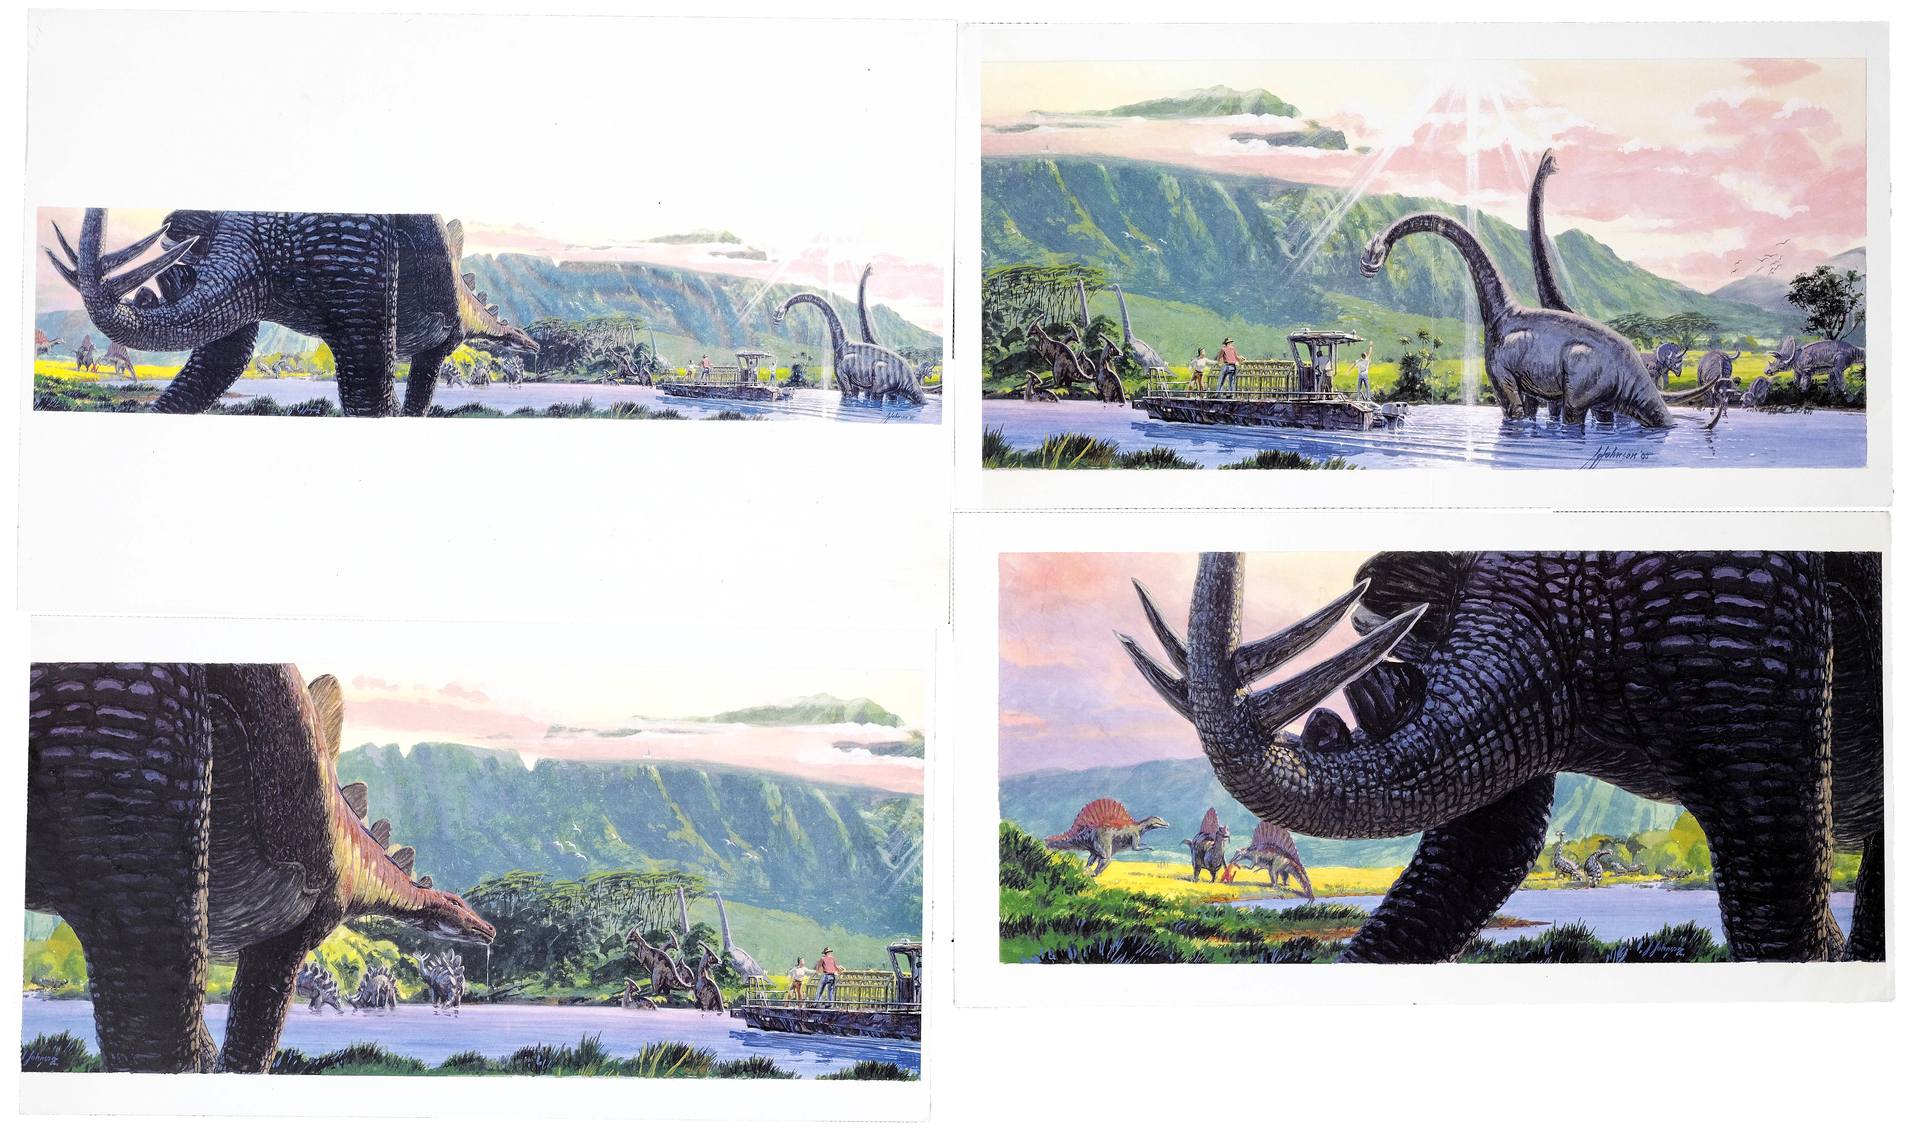 JURASSIC PARK III (2001) - Hand-Drawn Jack Johnson Artwork and Concept Art Copies - Image 2 of 2